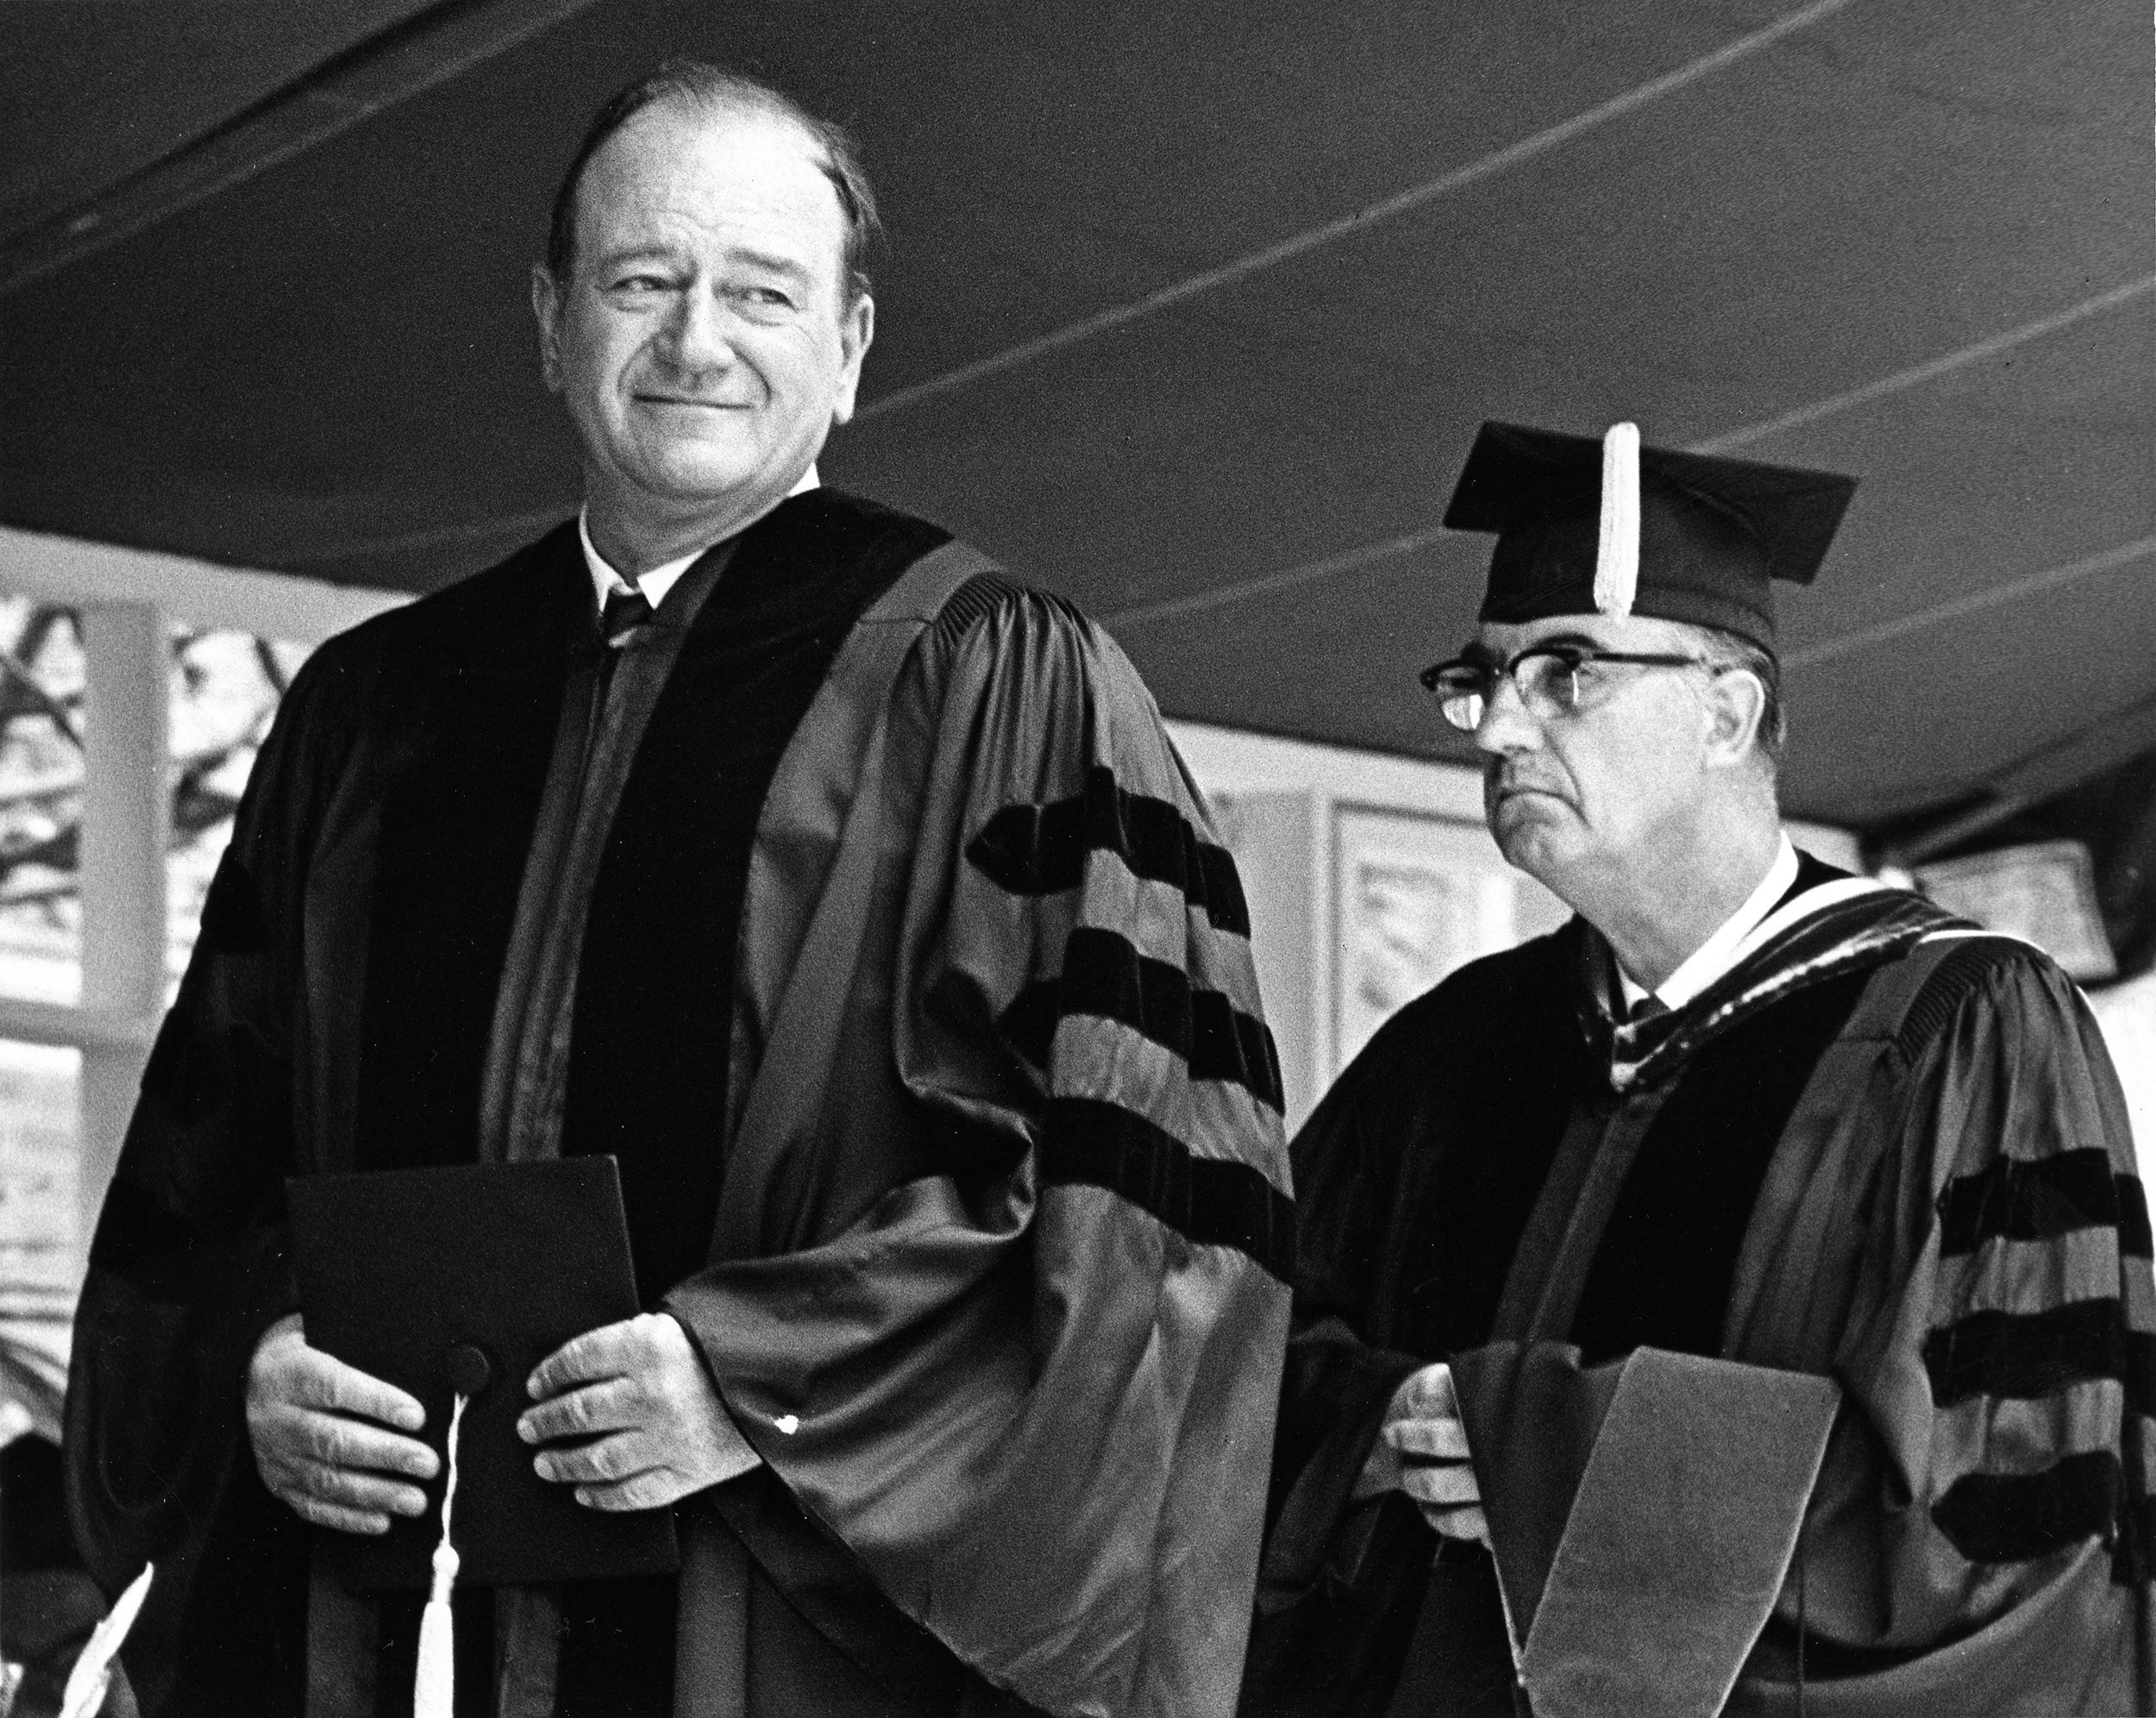 John Wayne (left) receiving his honorary doctorate degree from USC in 1968.